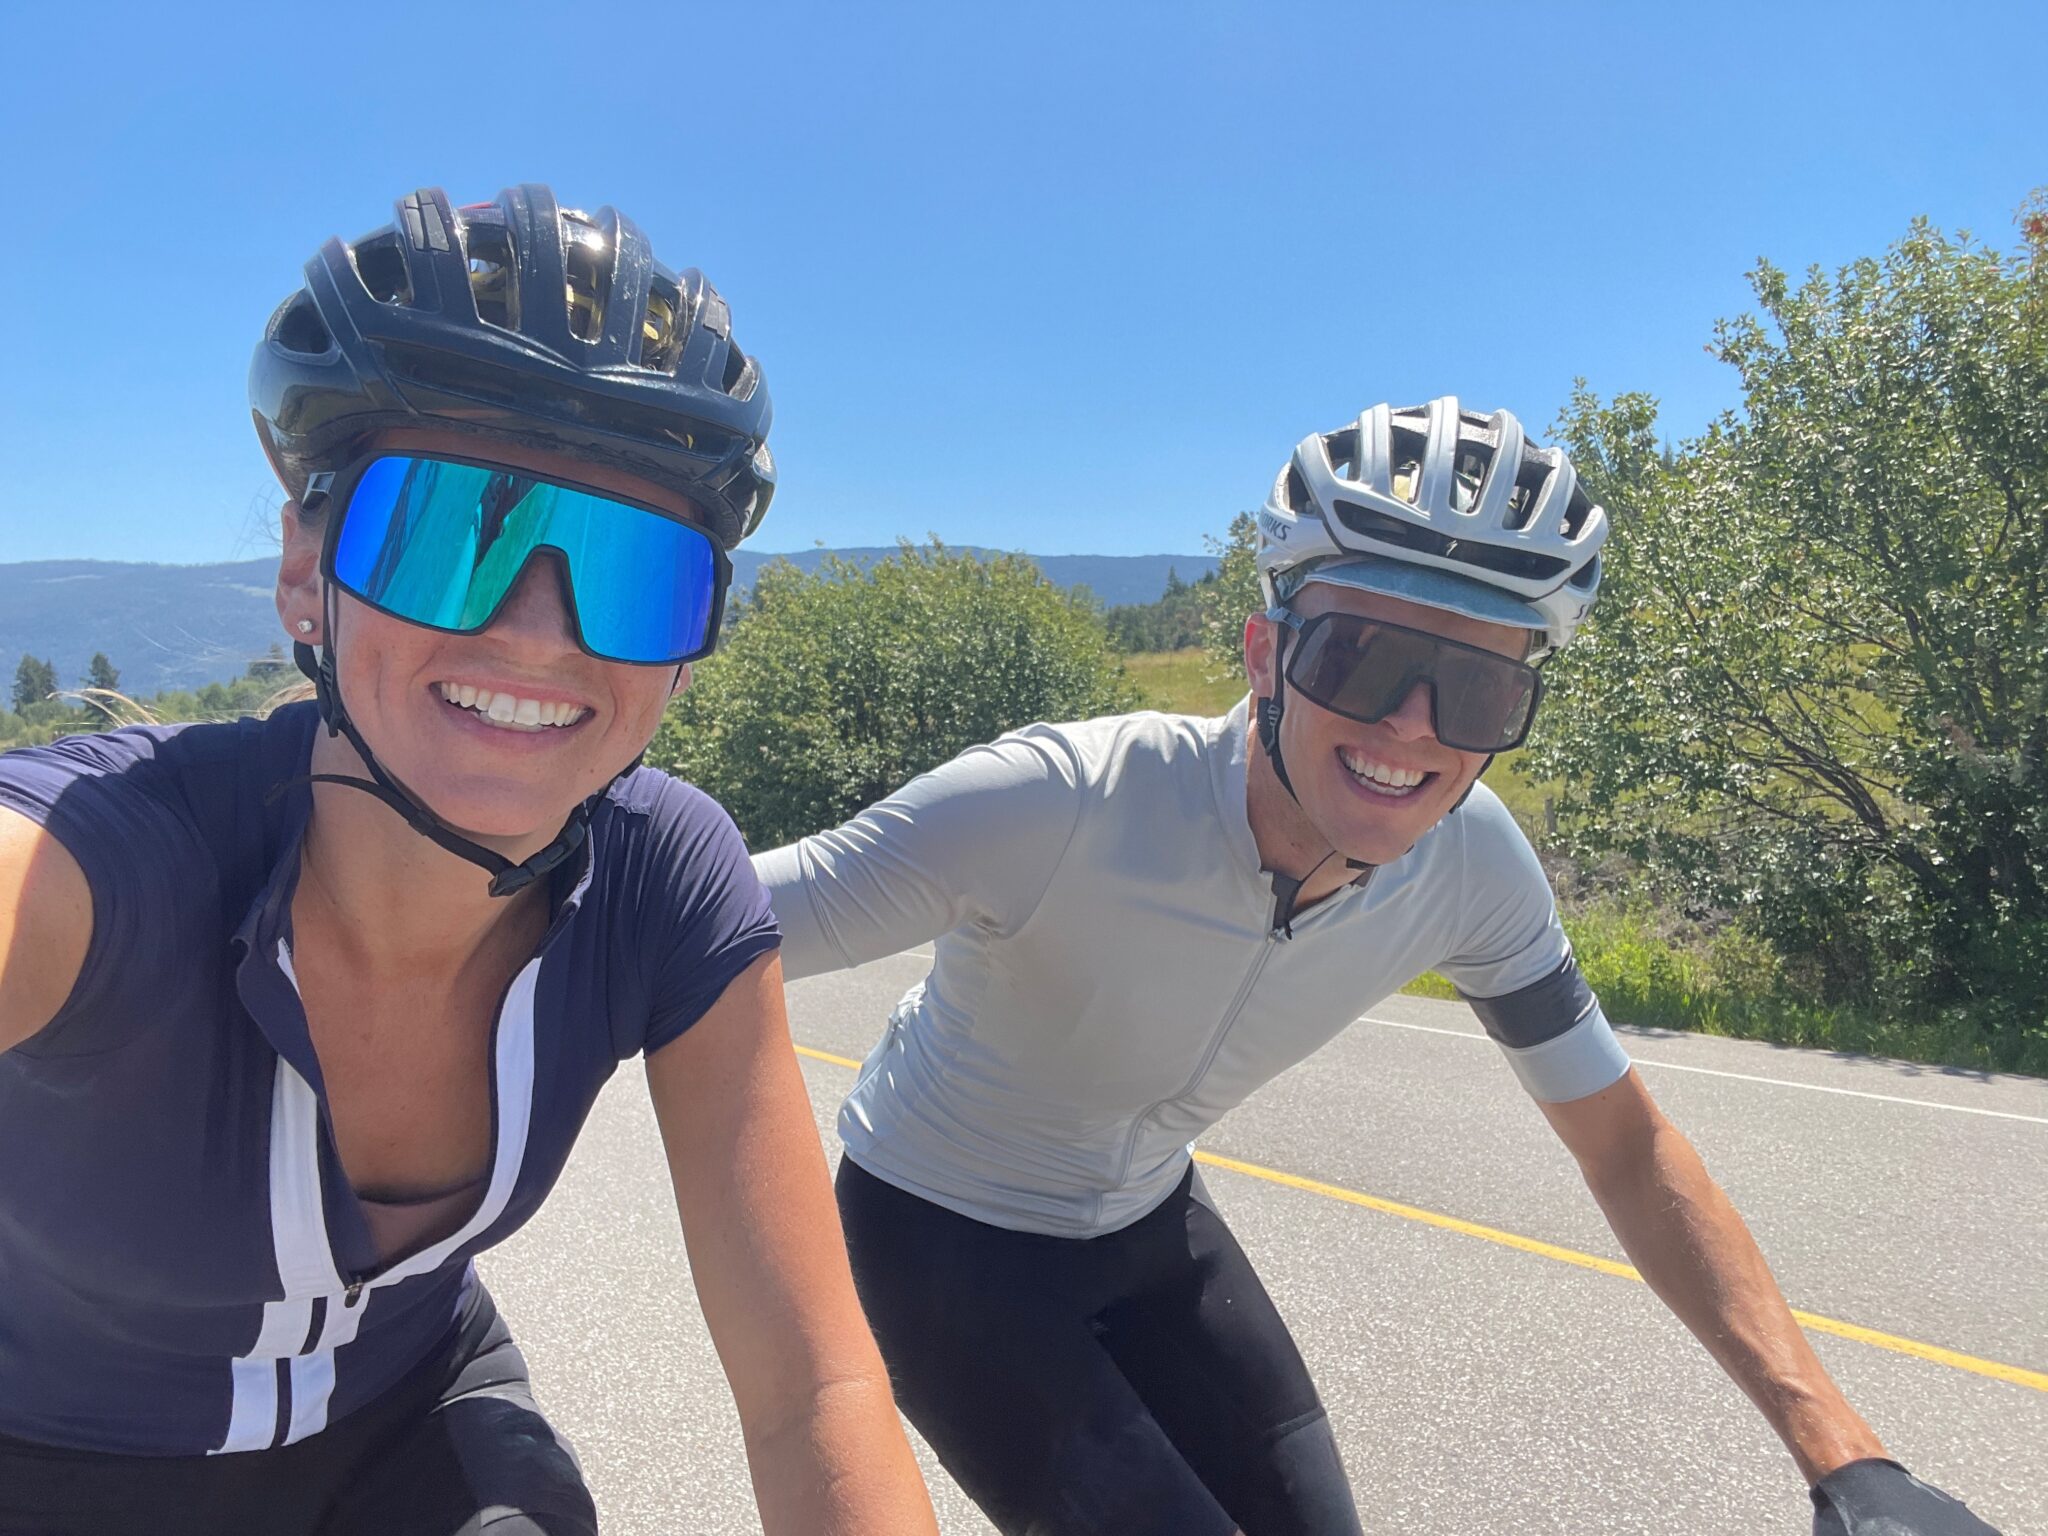 A photo of David and his wife Marit biking together on a road.